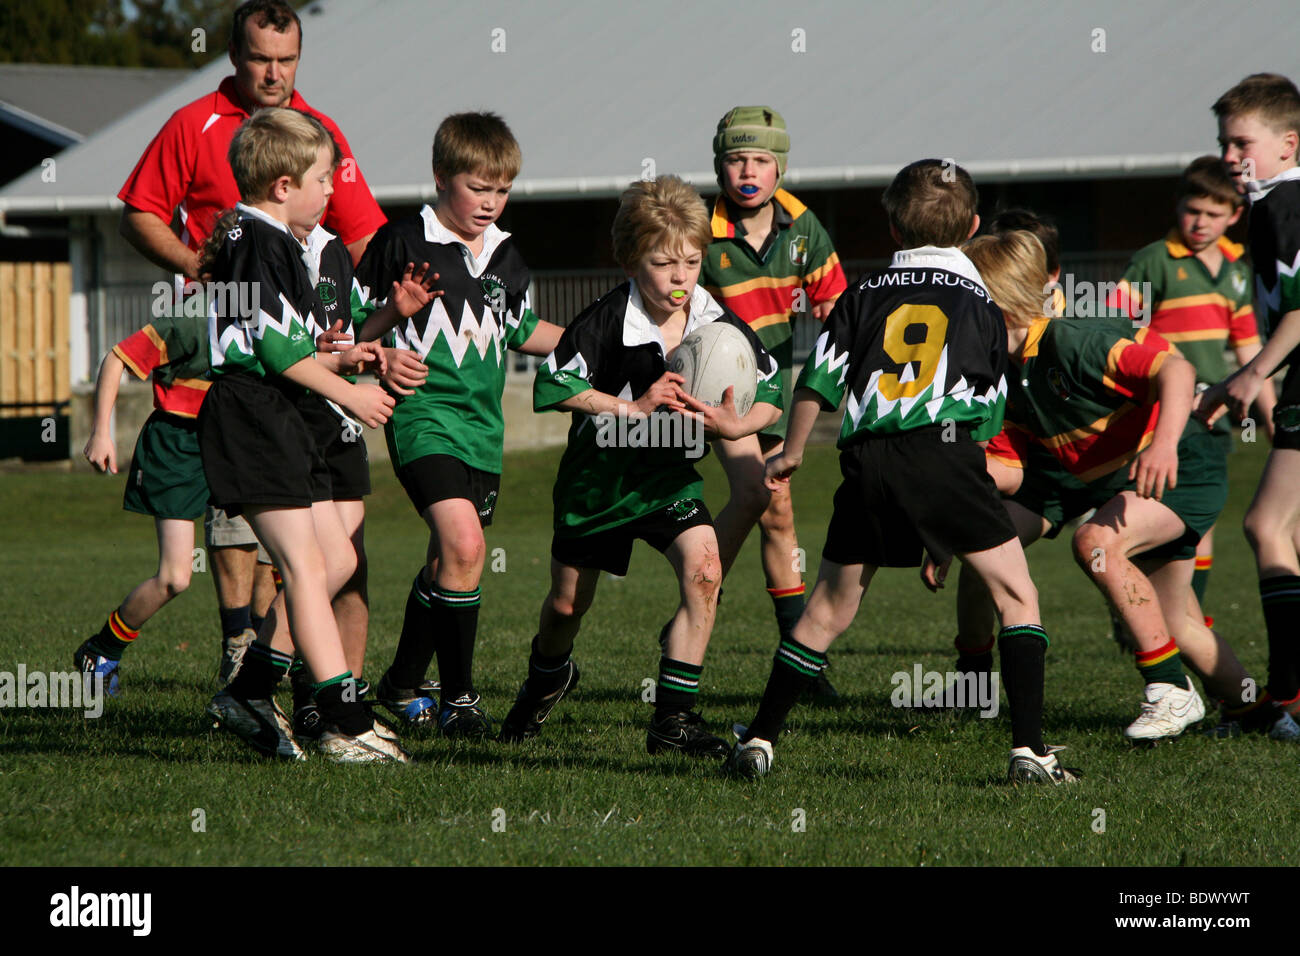 Young Boys spielen Rugby in Neuseeland Stockfoto